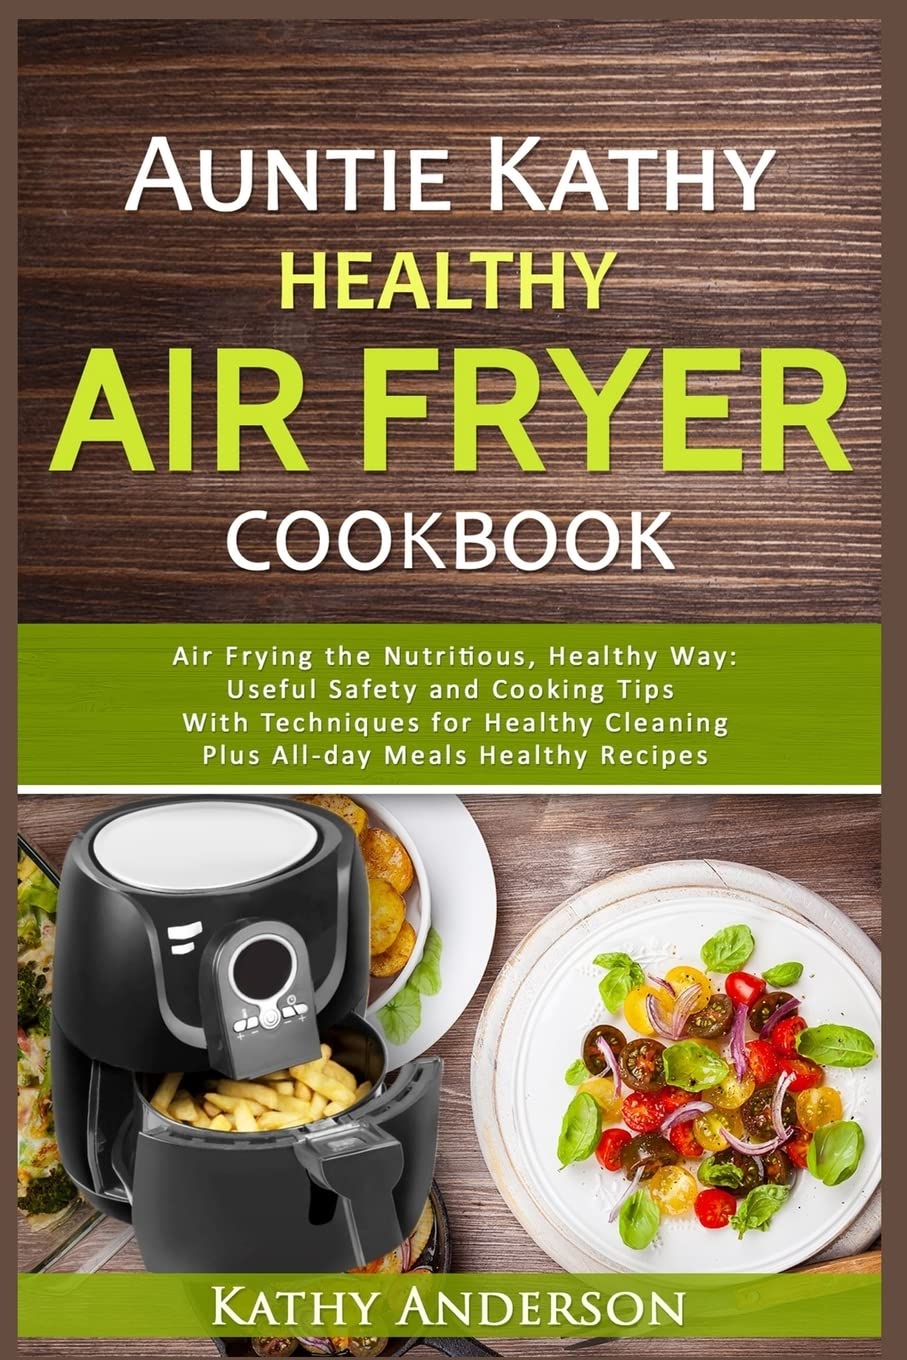 Auntie Kathy Healthy Air Fryer Cookbook: Air Frying the Nutritious, Healthy Way:Useful, Safety and Cooking Tips With Techniques for Healthy Cleaning Plus Healthy Recipes